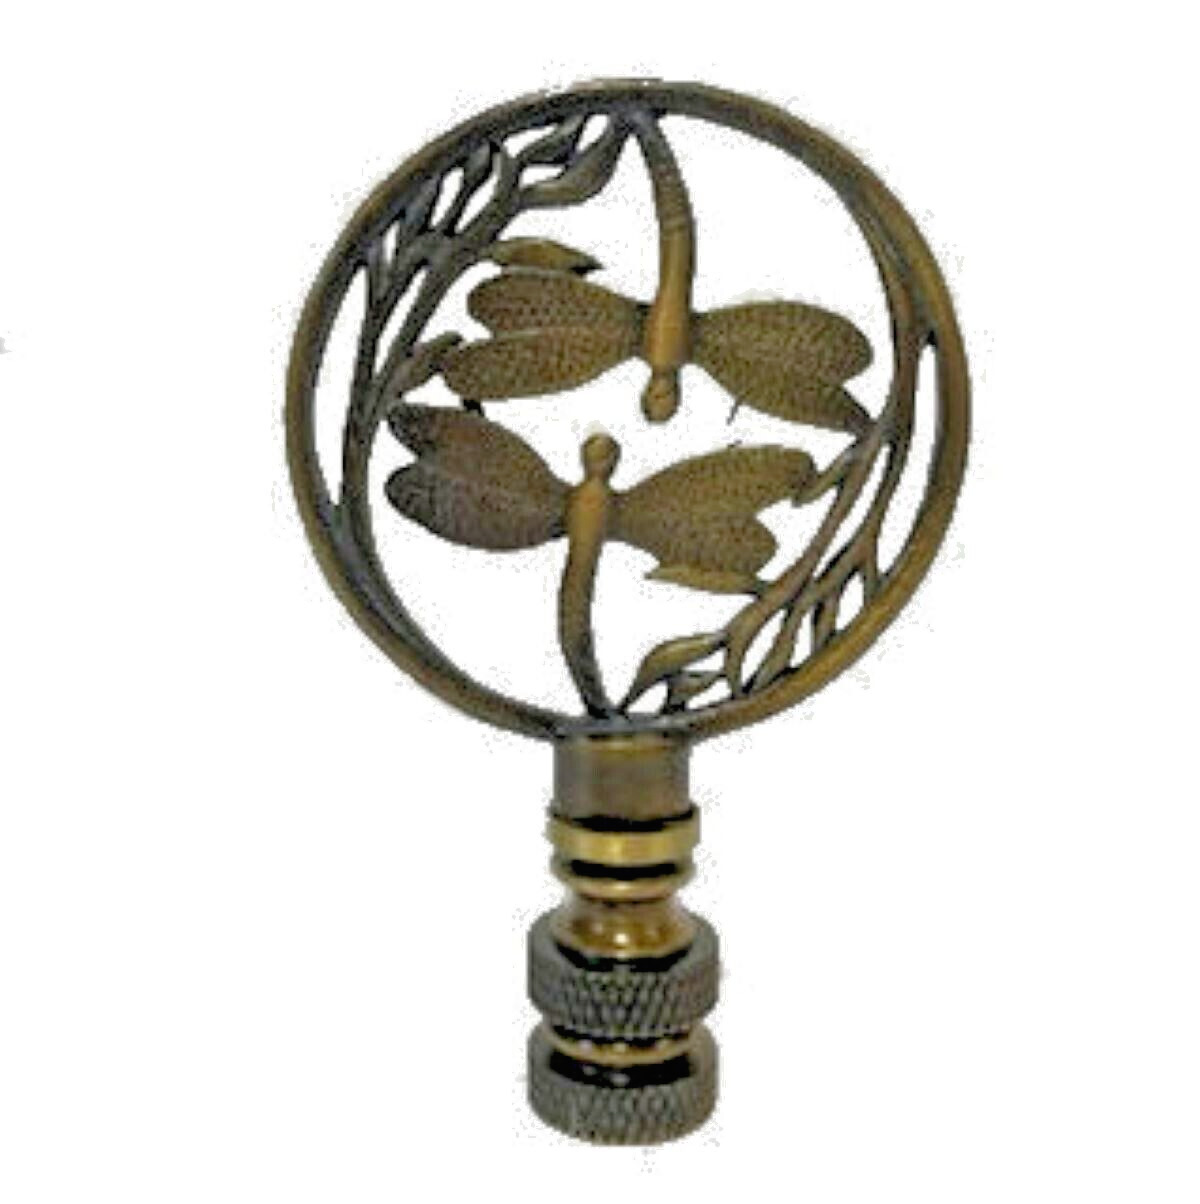 DOUBLE DRAGONFLY LAMP SHADE FINIAL ~ ANTIQUE BRASS  (FINIAL THREAD)